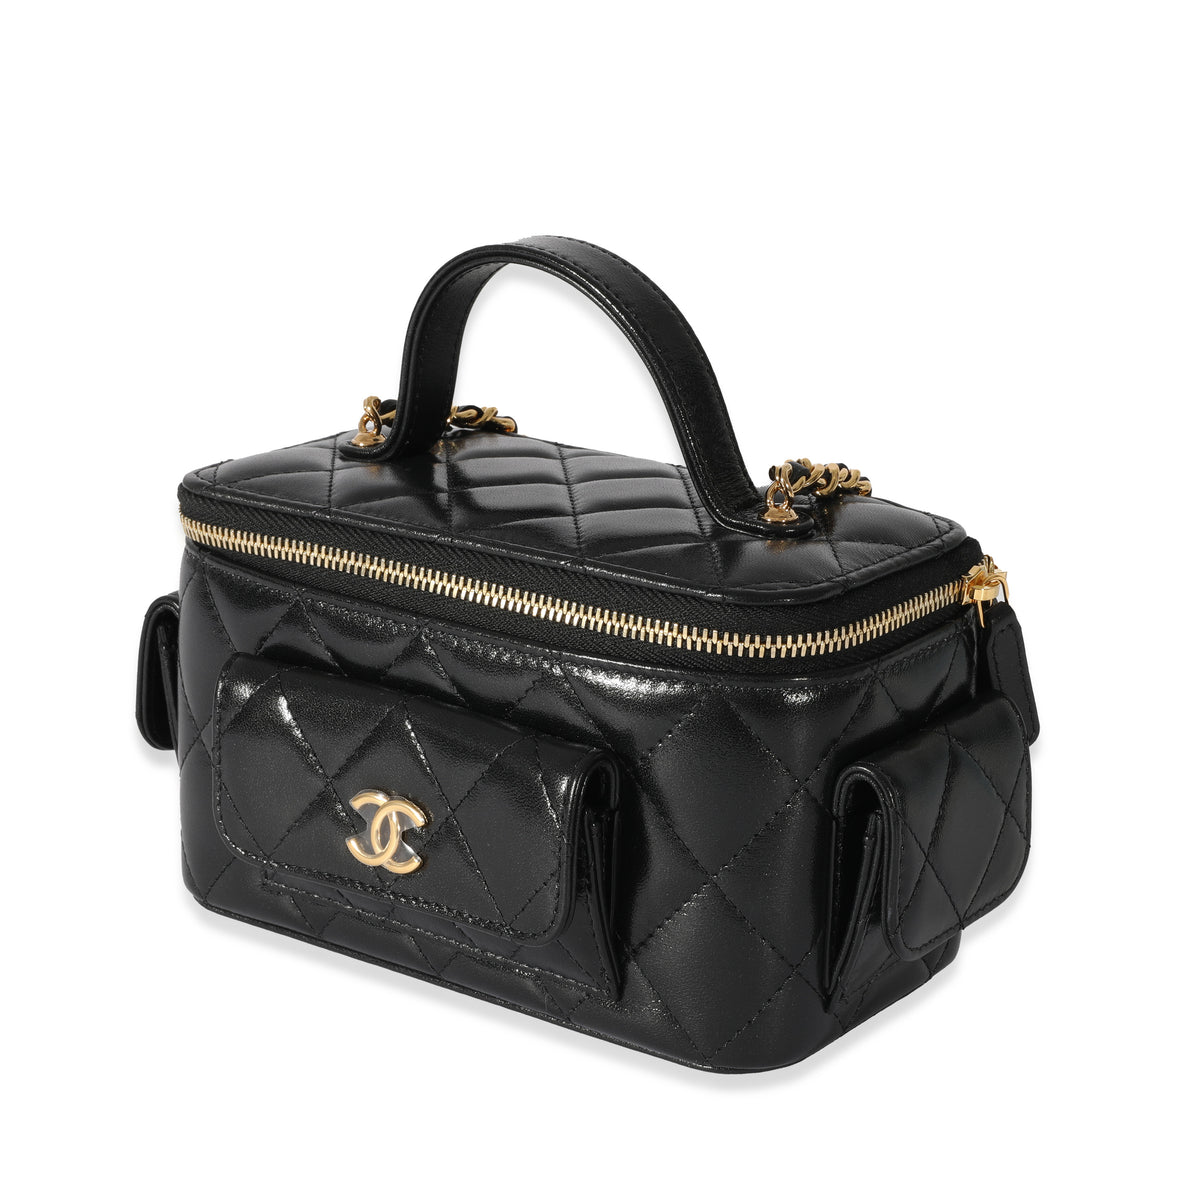 Chanel 22K Black Leather Vanity With Chain, myGemma